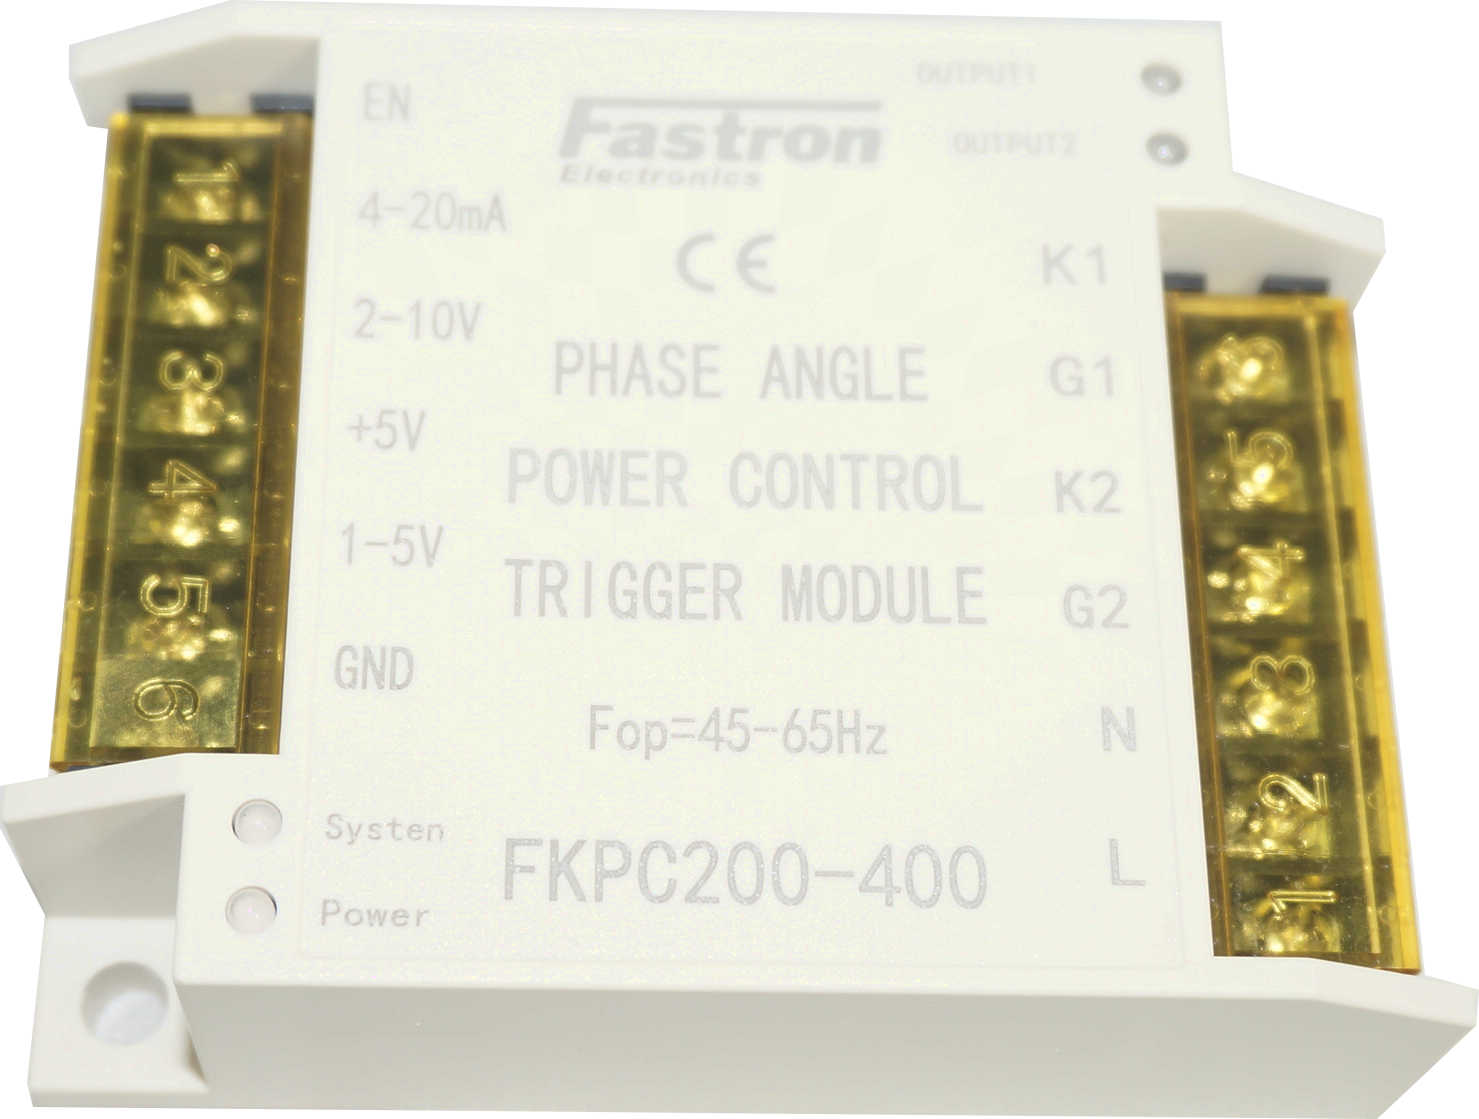 FKPC200-400 (FKPC-240-CE), Single Phase Voltage Control SCR Trigger Module, 4-20mA,2-10V,1-5V,5K POT Input, 200-450VAC, 240VAC Aux Supply, CE Approved, See FKPC-200-400 REV 2 FOR UPDATED DESIGN